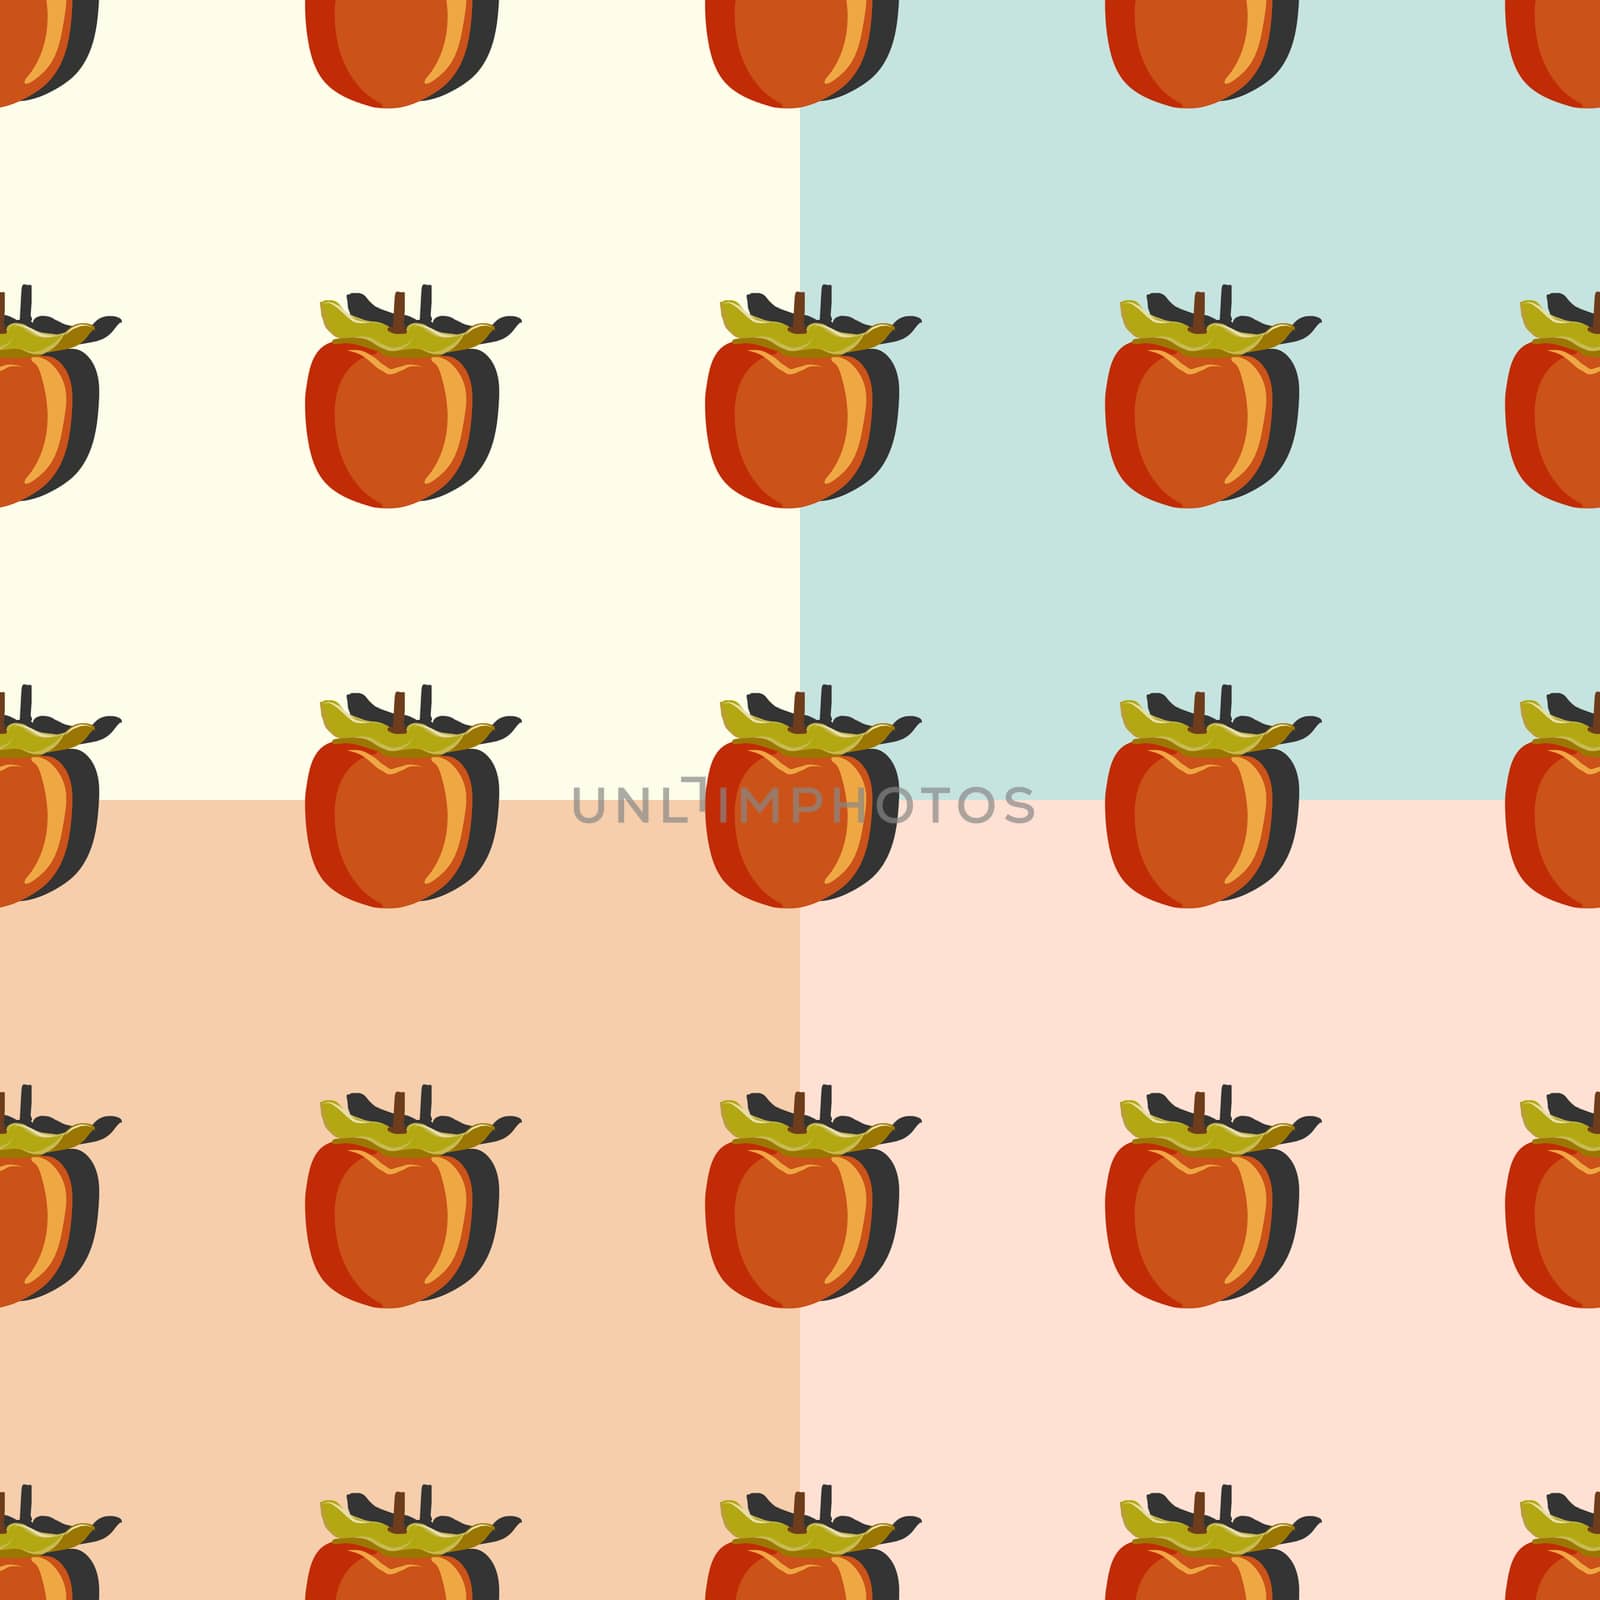 Sharon fruit top view with shadow pop art seamless pattern on pink, orange, beige, turquoise background. Persimmon endless pattern design for wallpapers, fabrics, textiles, packaging.